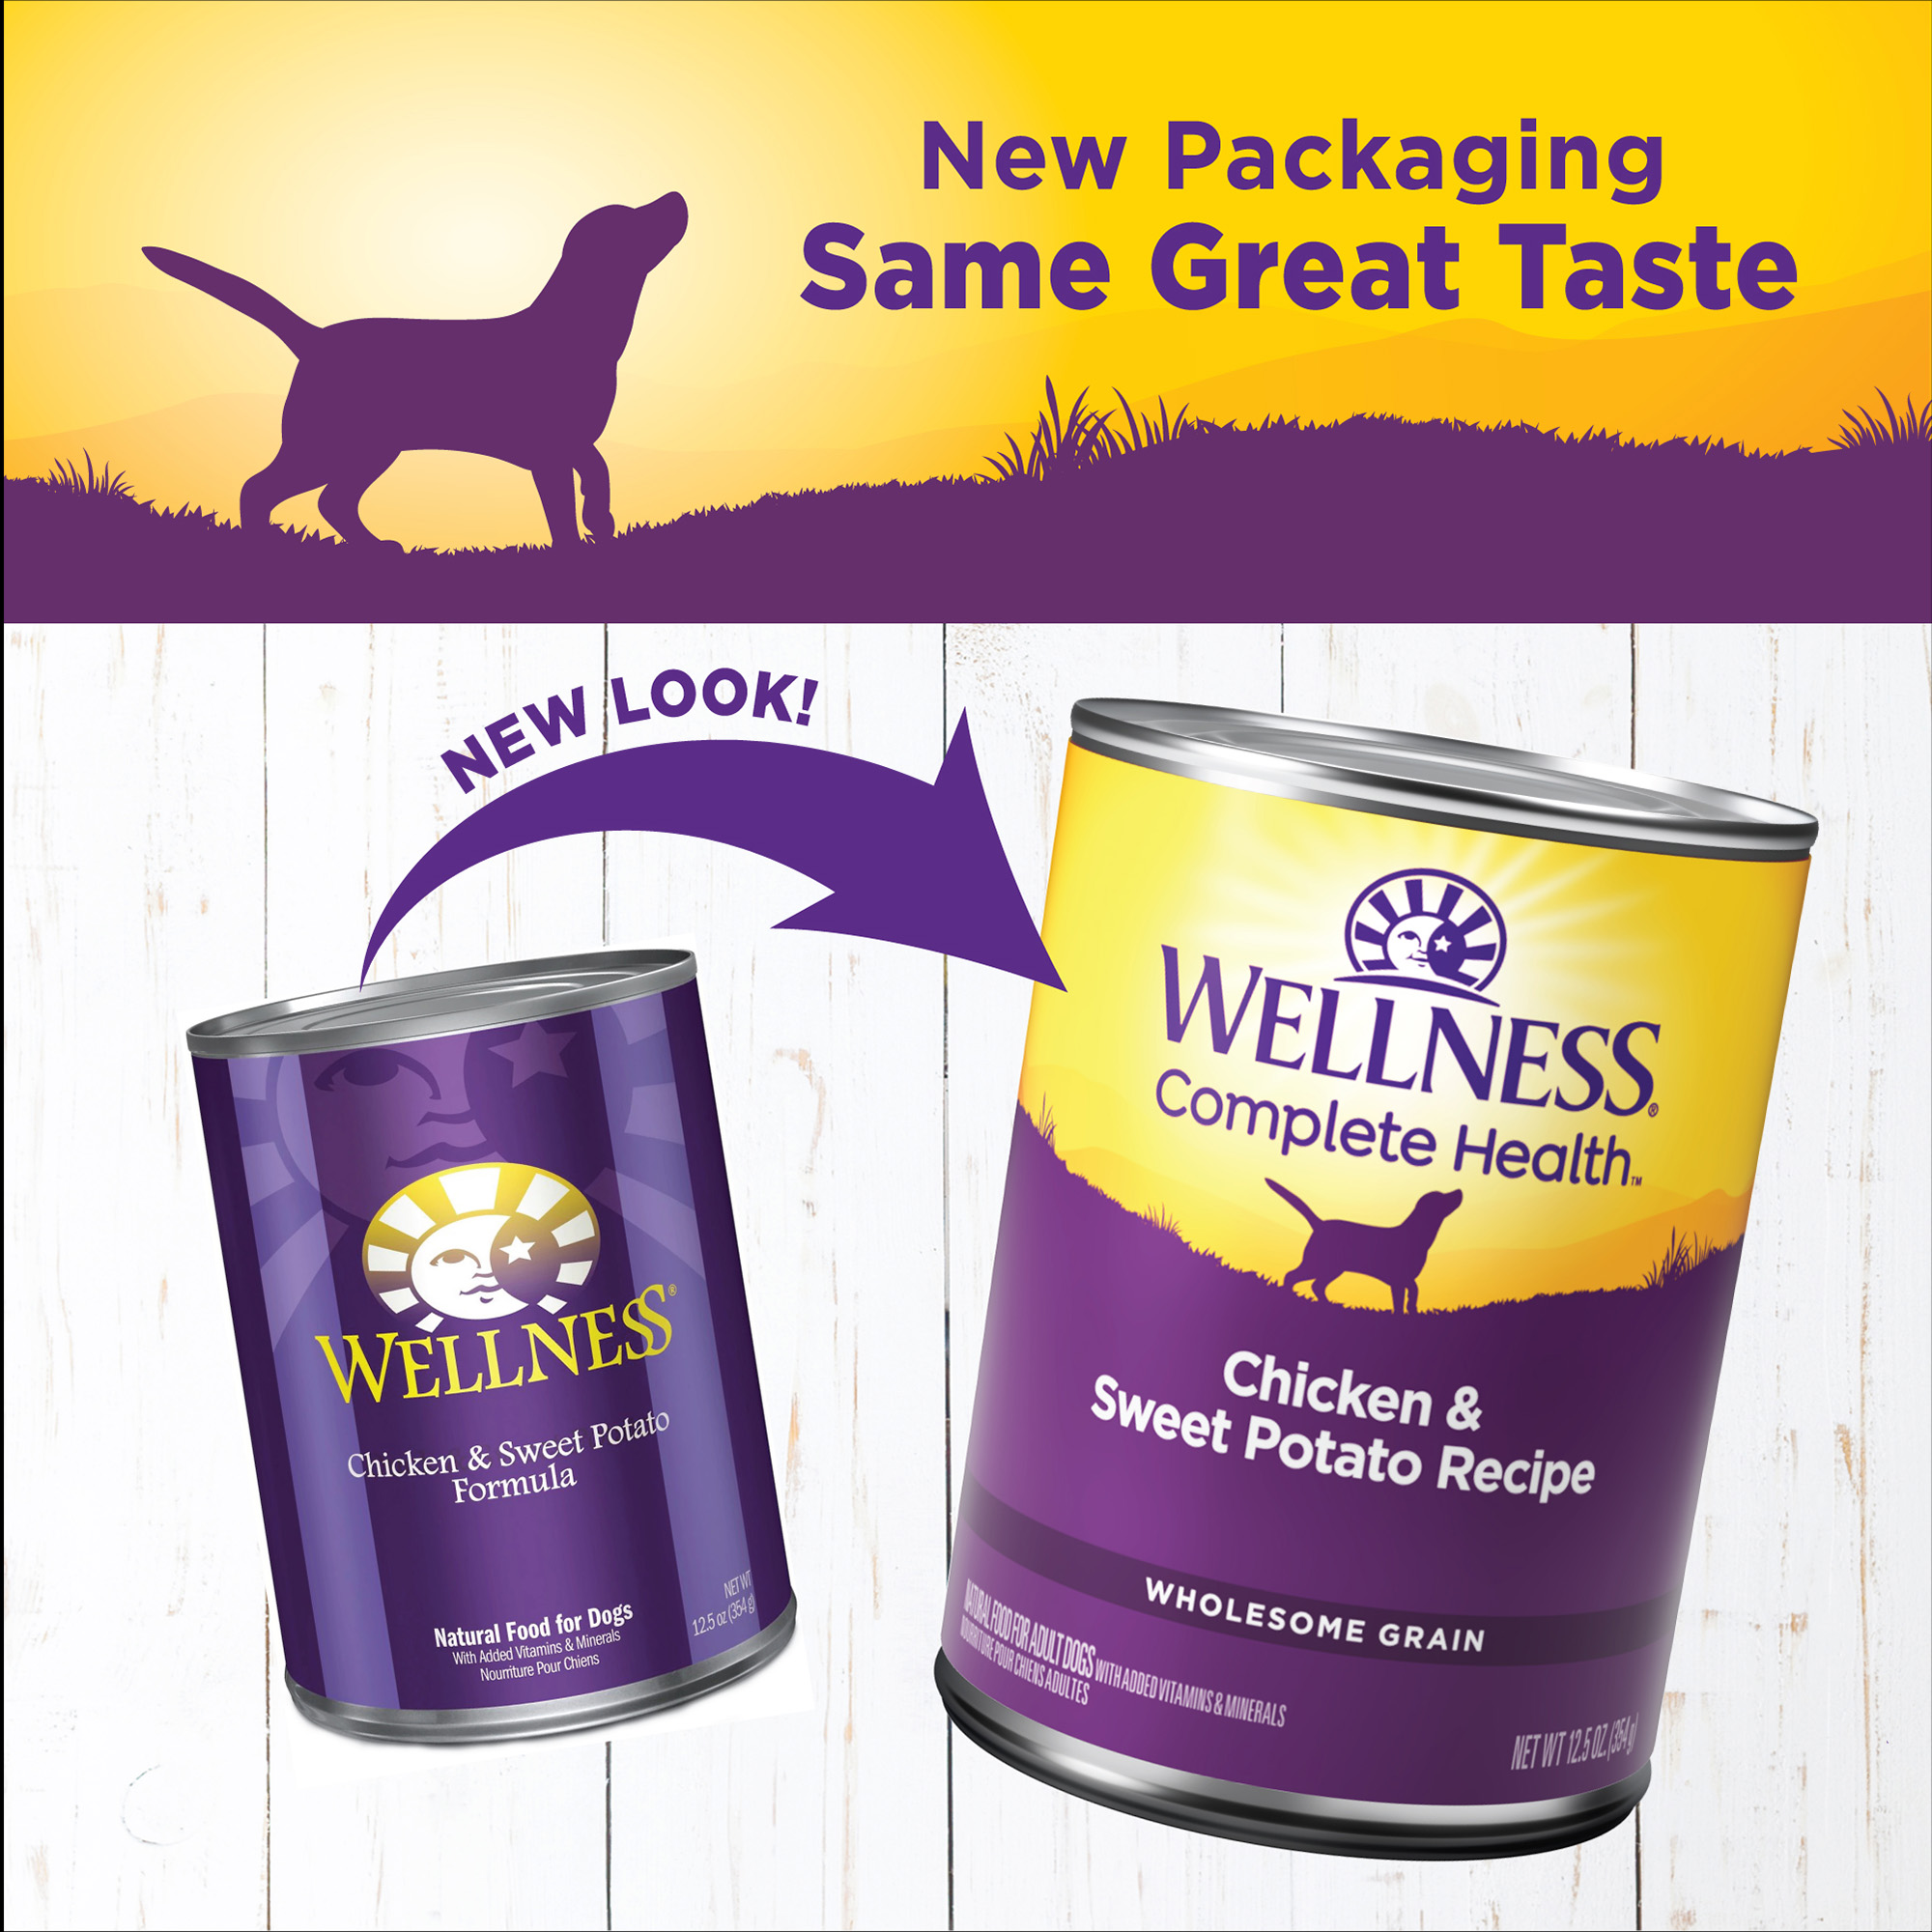 Wellness Complete Health Natural Wet Canned Dog Food, Chicken & Sweet Potato, 12.5-Ounce Can (Pack of 12) - image 3 of 7